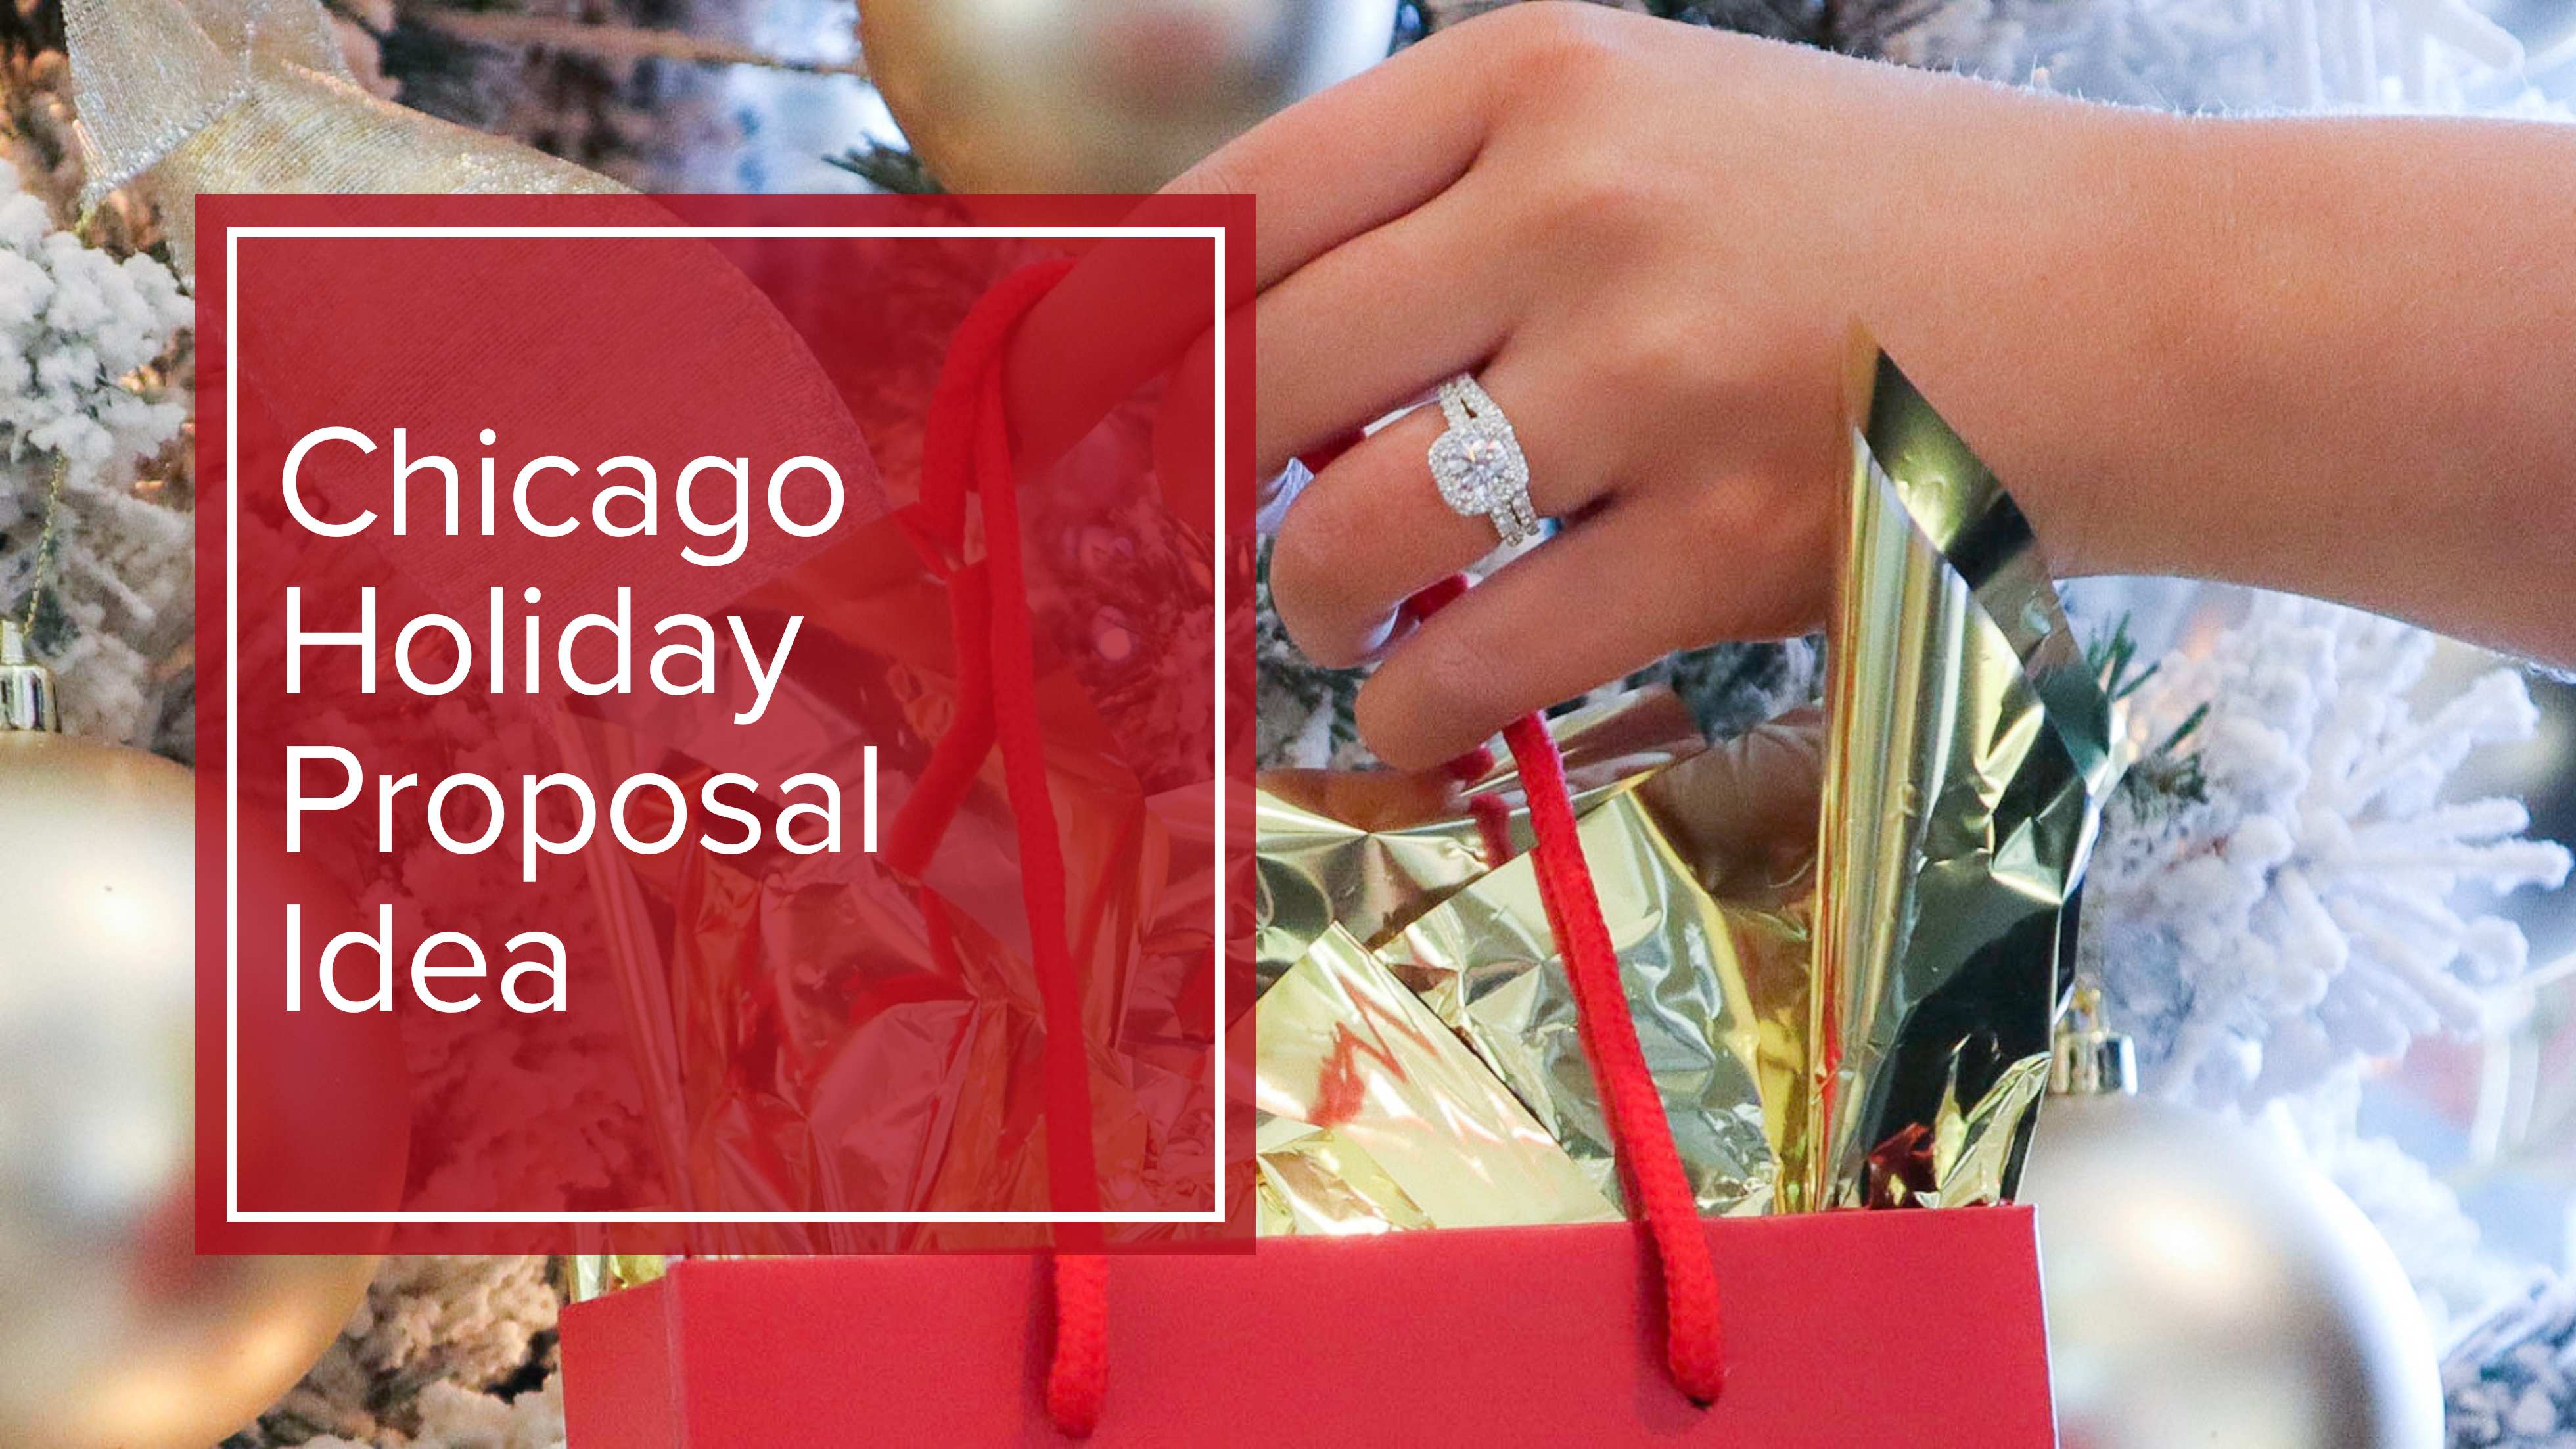 CHICAGO HOLIDAY PROPOSAL IDEA